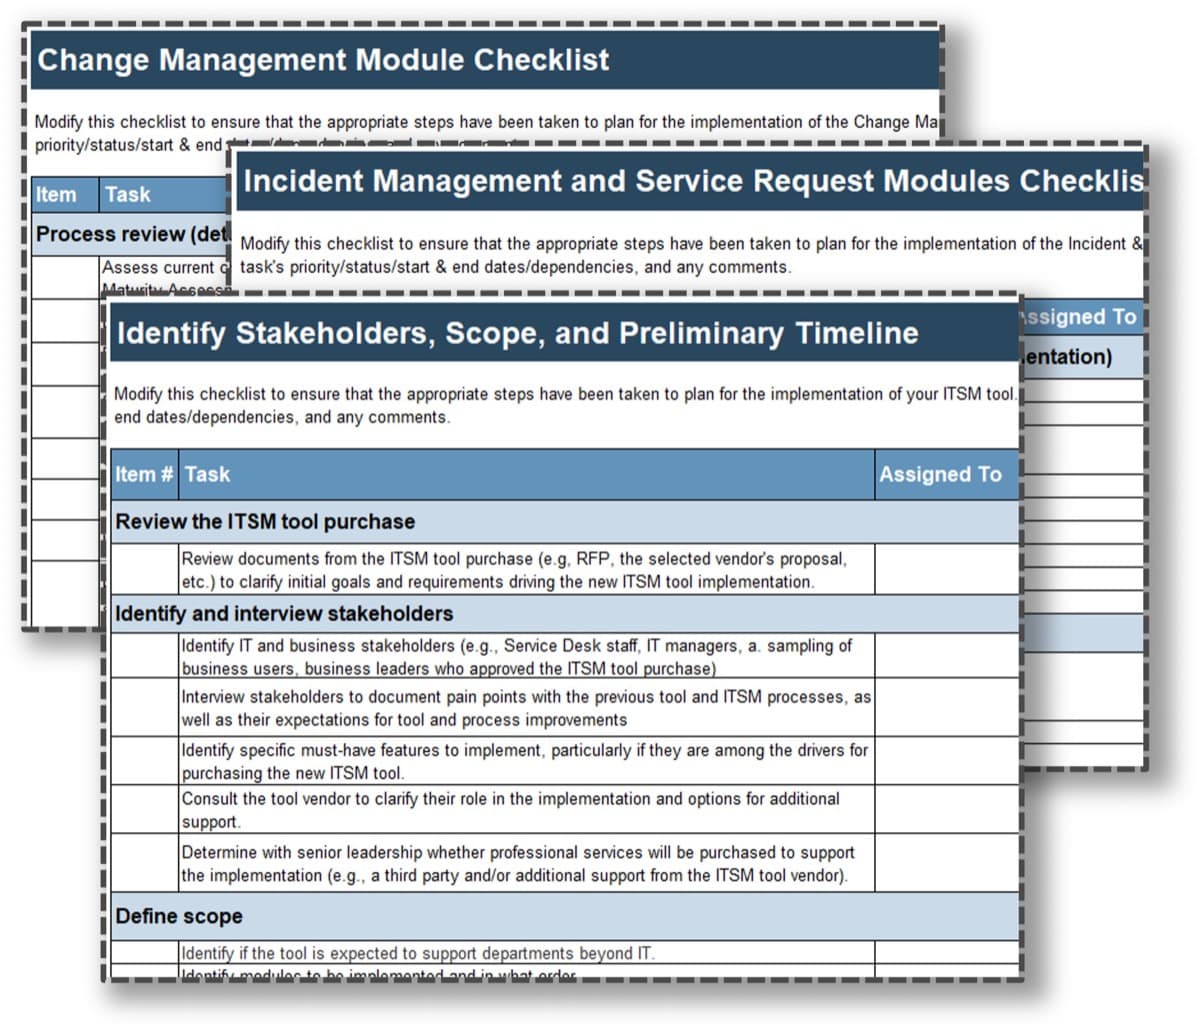 The image contains screenshots from the Implementation Checklist.